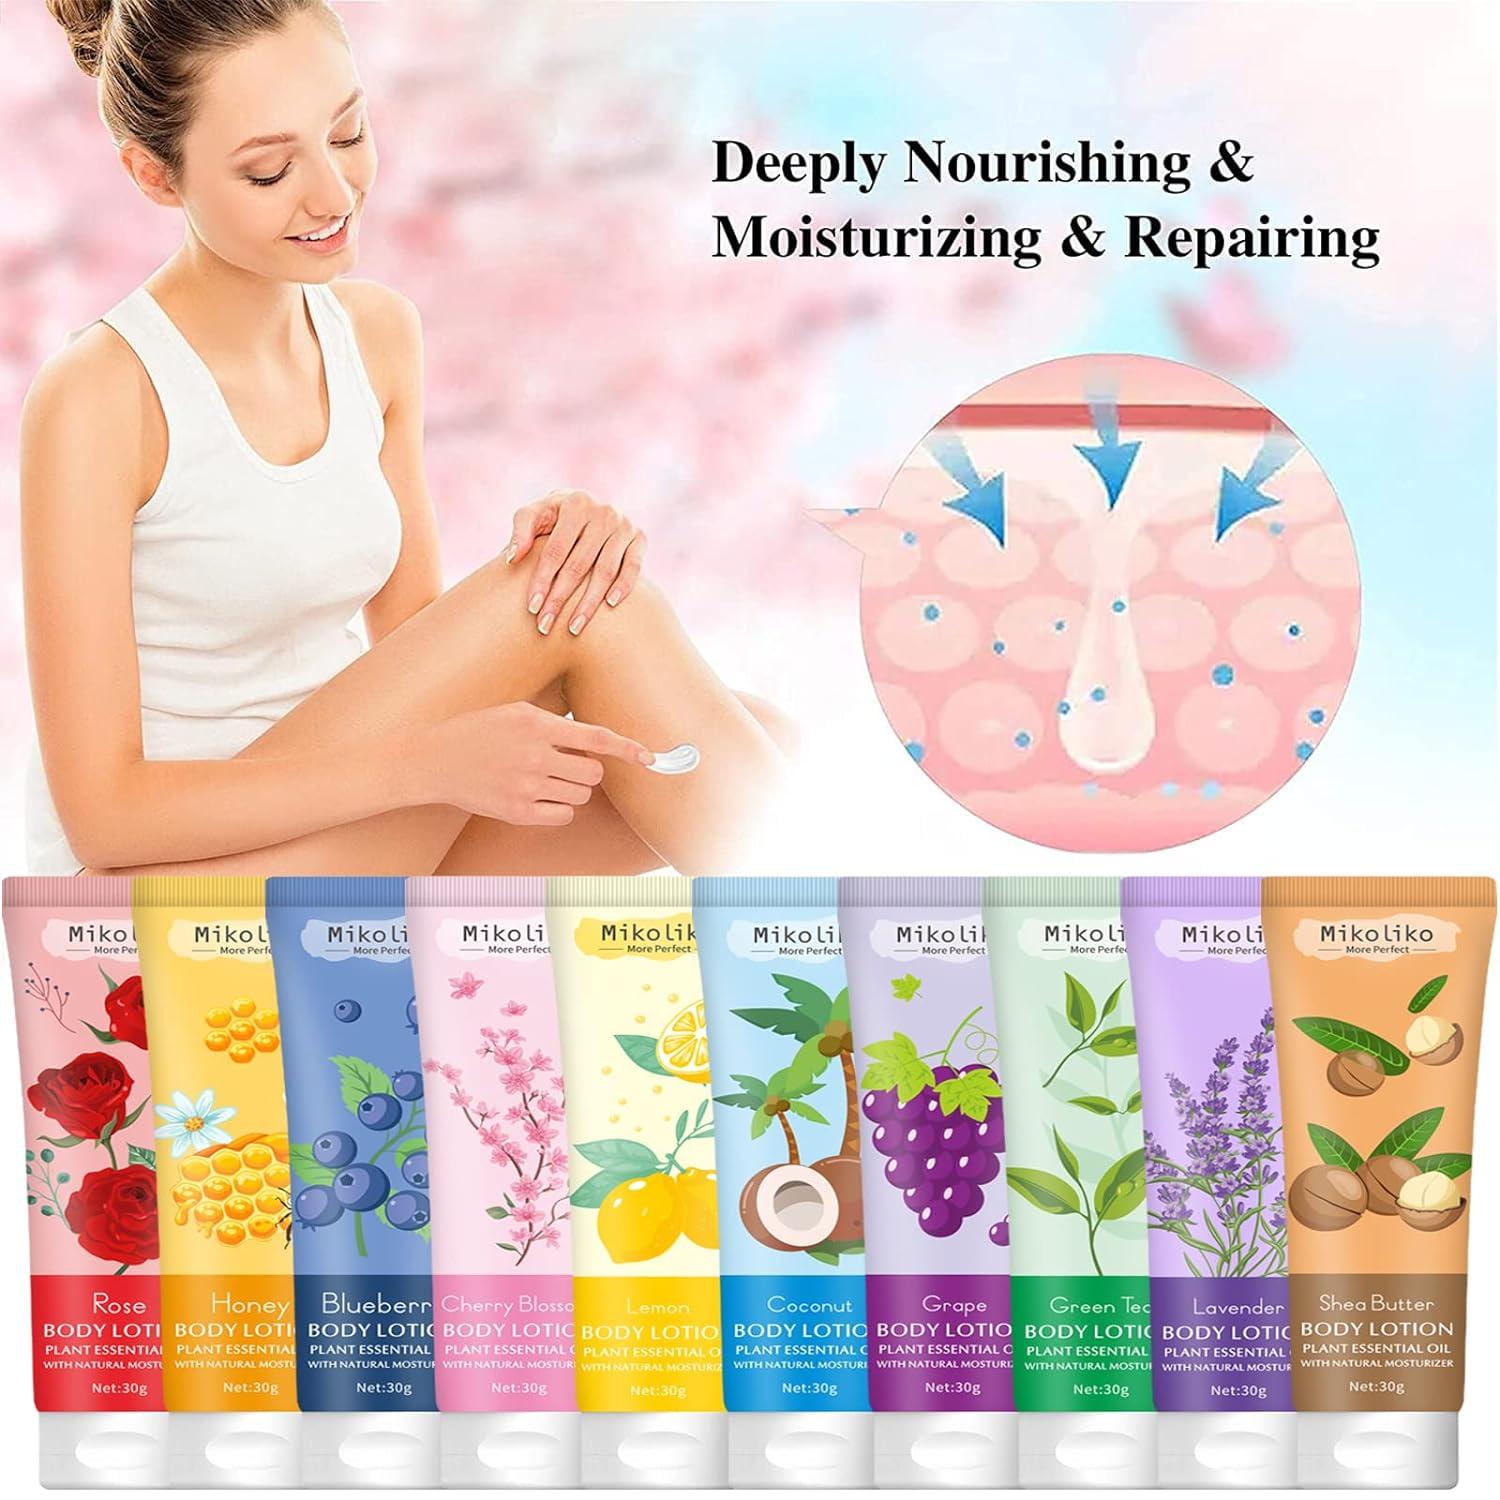 20 PACK Body Lotion Bulk for Dry Skin,Travel Size Lotion Sets for  Women-Natural Scented Body Moisturizer Mini Travel Lotions Shea Butter  Lotion,Birthday Mother's Day Gifts for Her Mom Wife Girlfriend